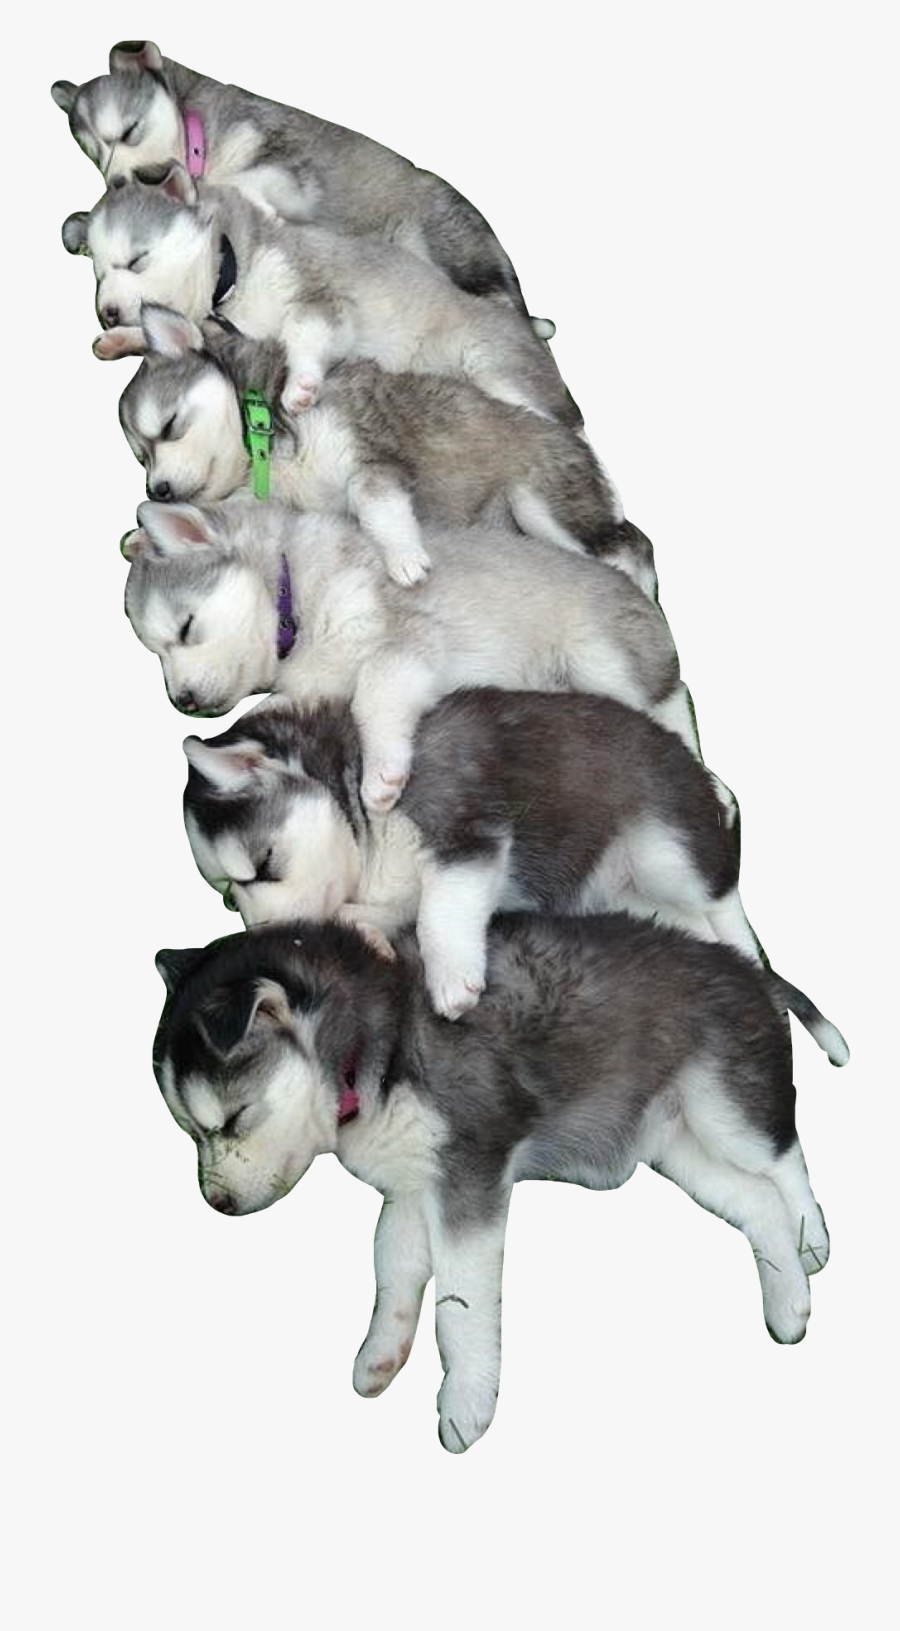 #huskies #pup #puppy #puppies #dogs #dog #dawg #cute - Puppy Grey Siberian Husky, Transparent Clipart